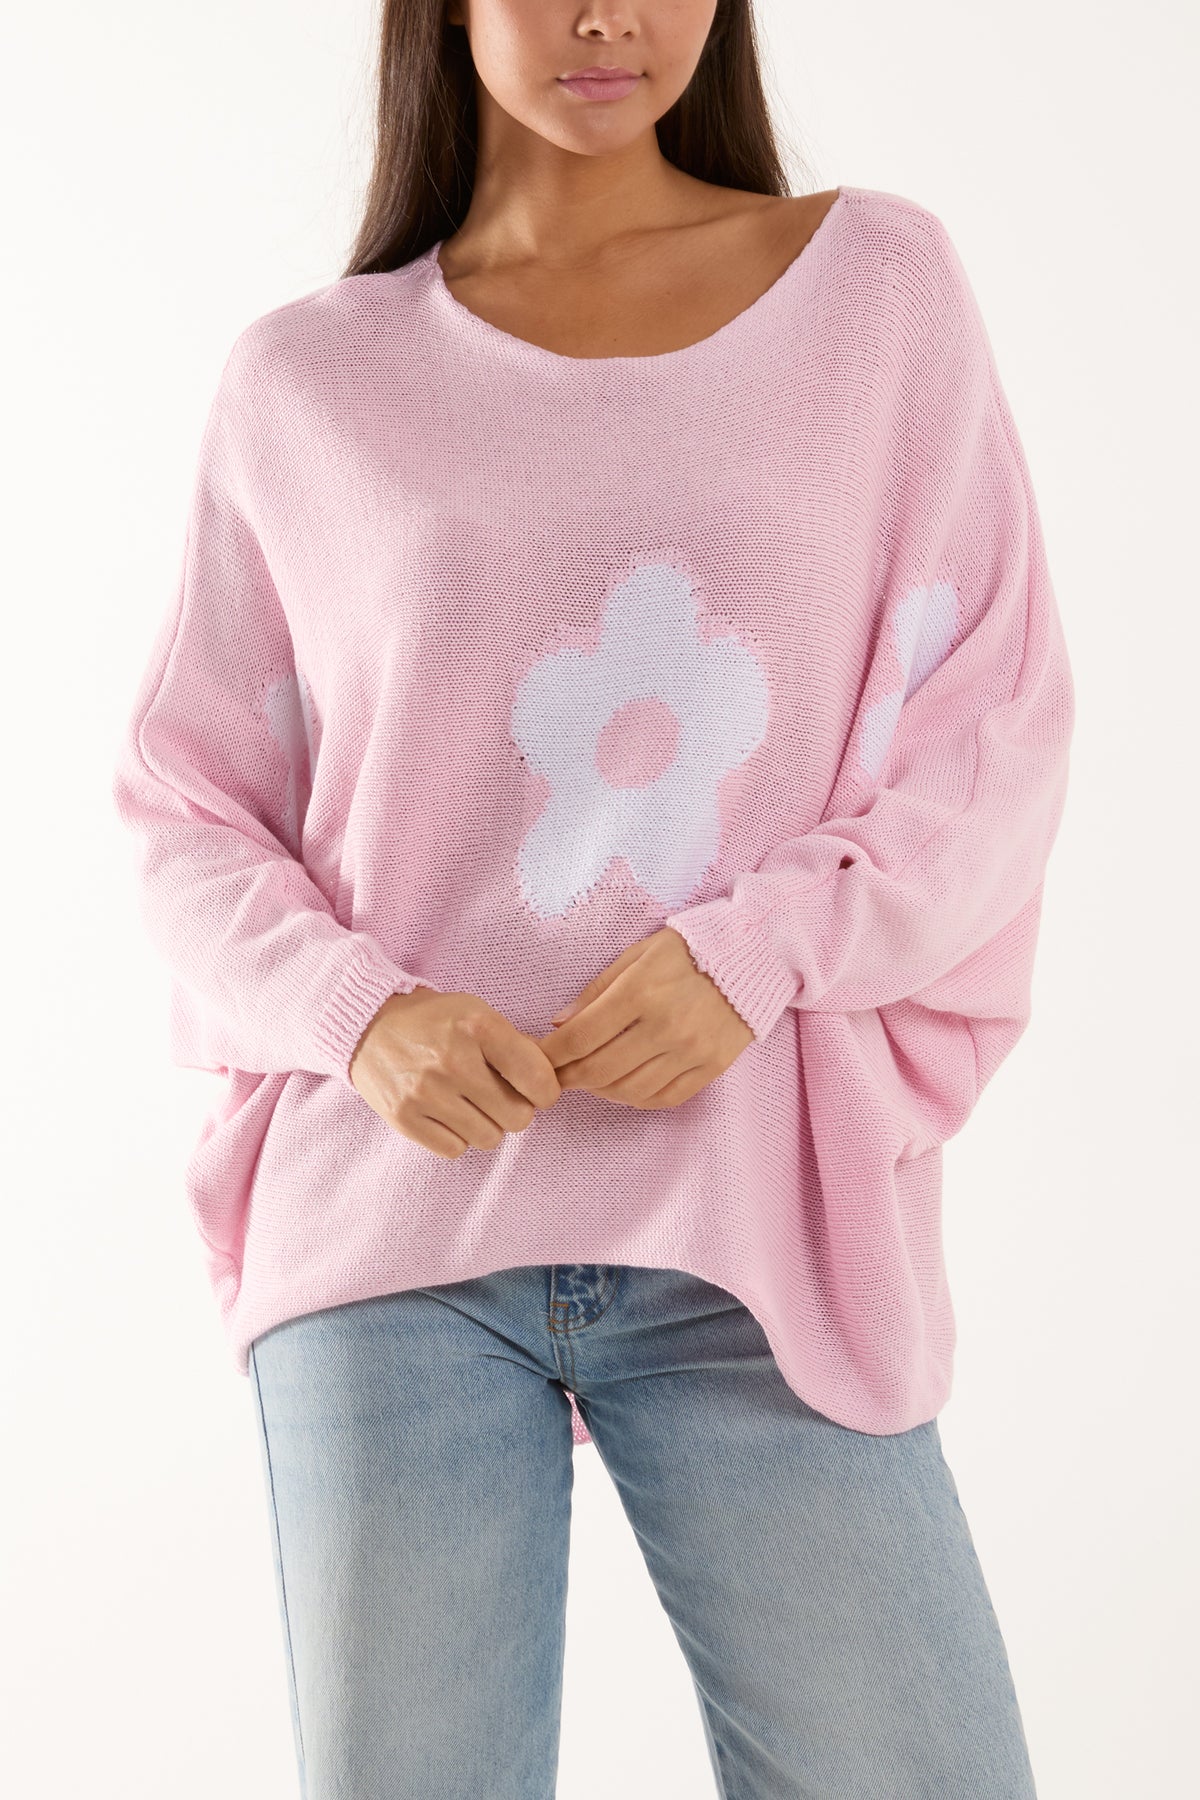 Daisies High Low Batwing Jumper